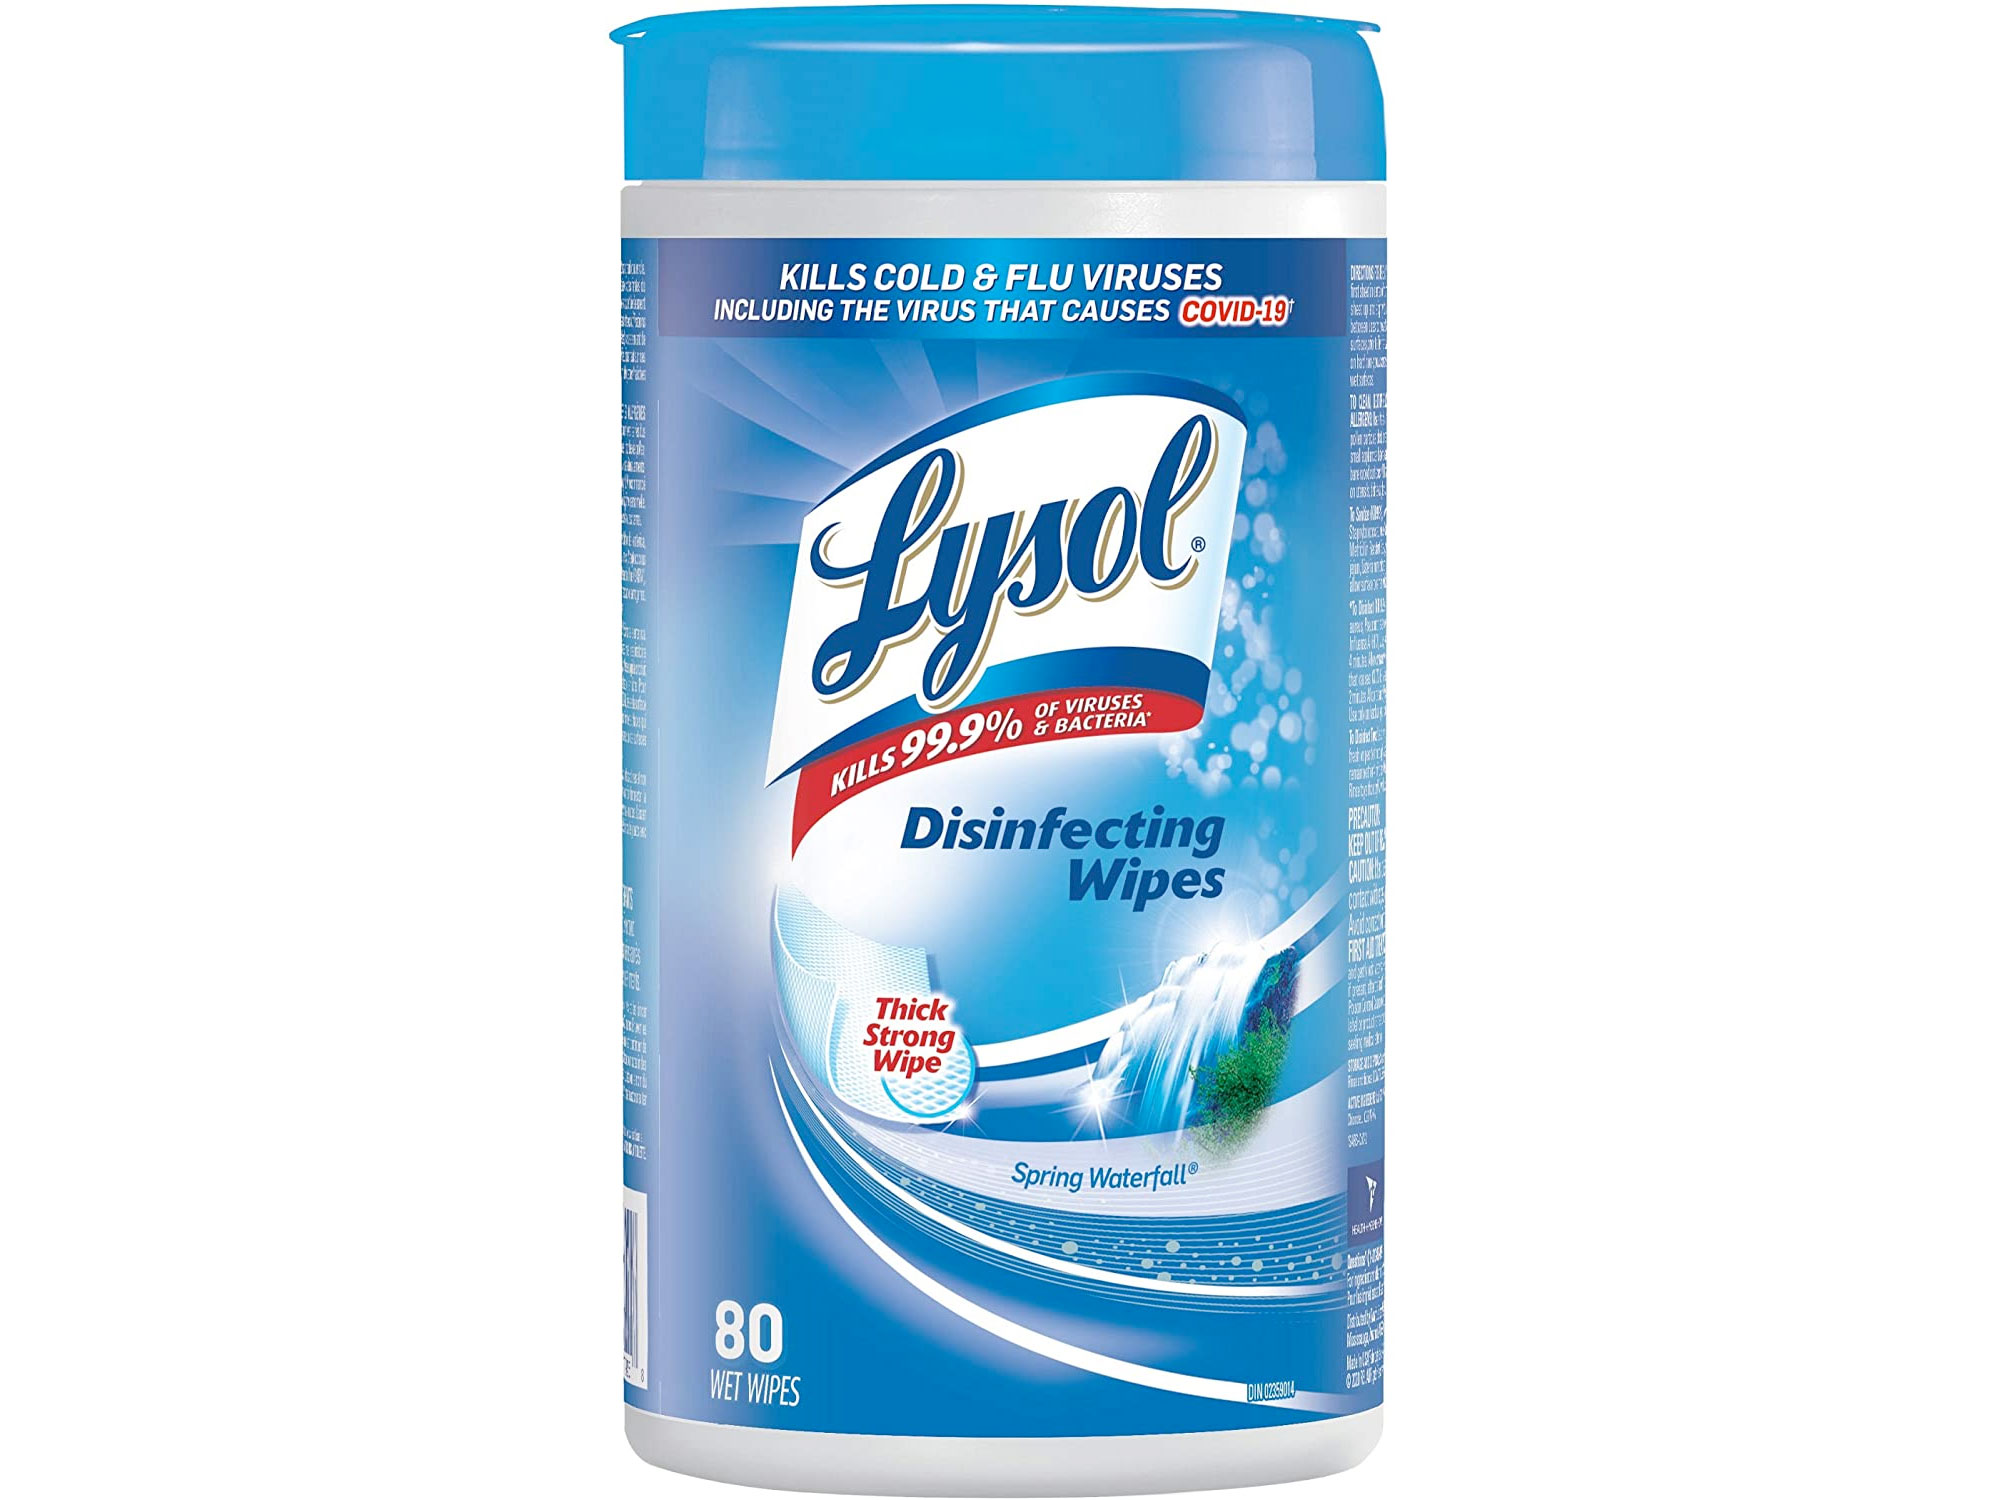 Amazon： Lysol Disinfecting Wipes (80 Wipes)只賣$4.99